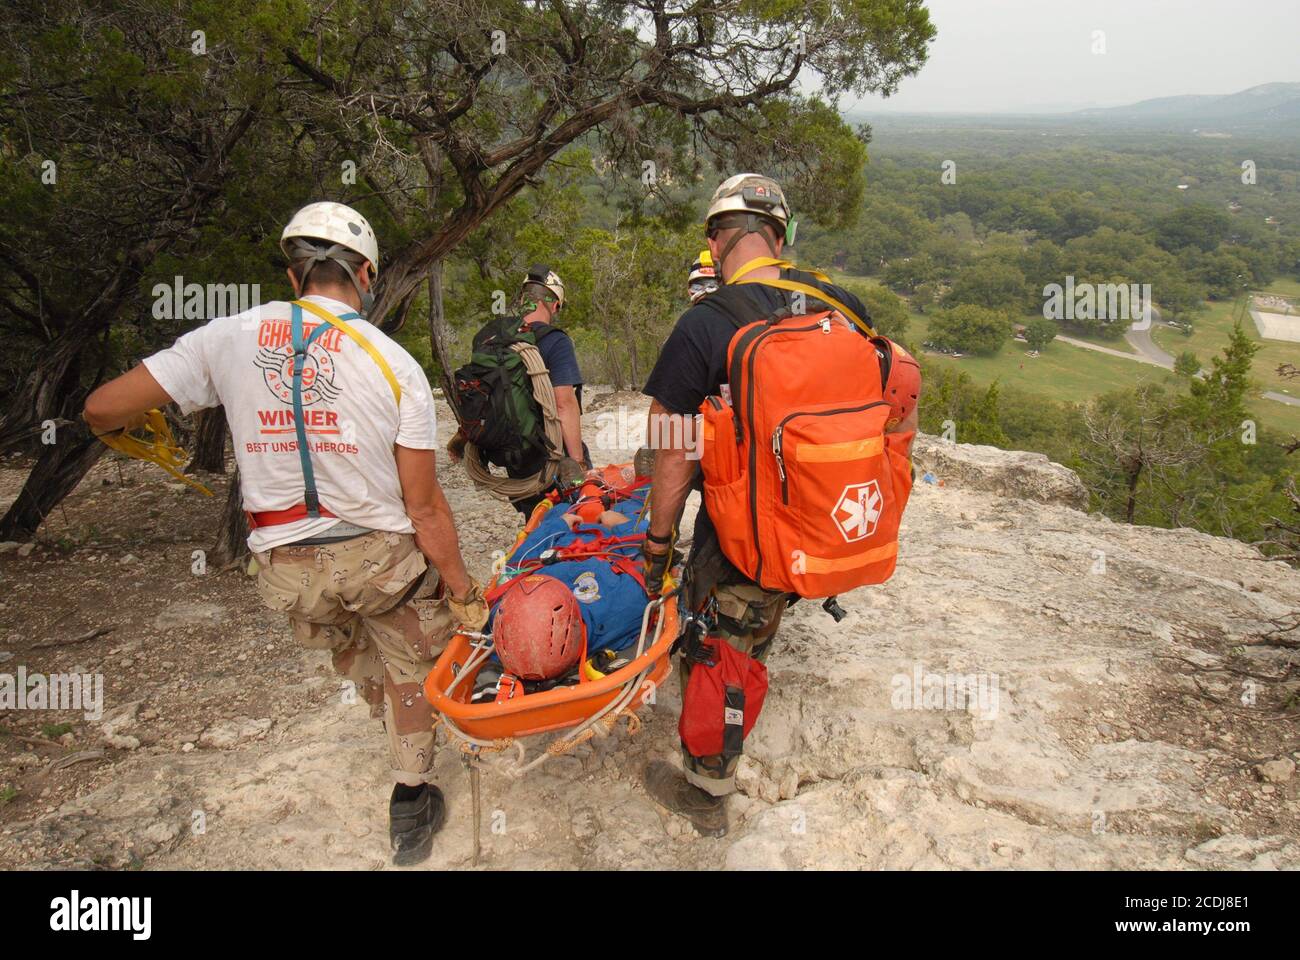 Concan, TX October 7, 2006: Professional fire rescue teams from throughout Texas practice vertical rescues in competitions at Garner State Park in Uvalde County, TX. The annual meet gives firefighters the chance to practice new techniques in non-life threating situations.        ©Bob Daemmrich Stock Photo